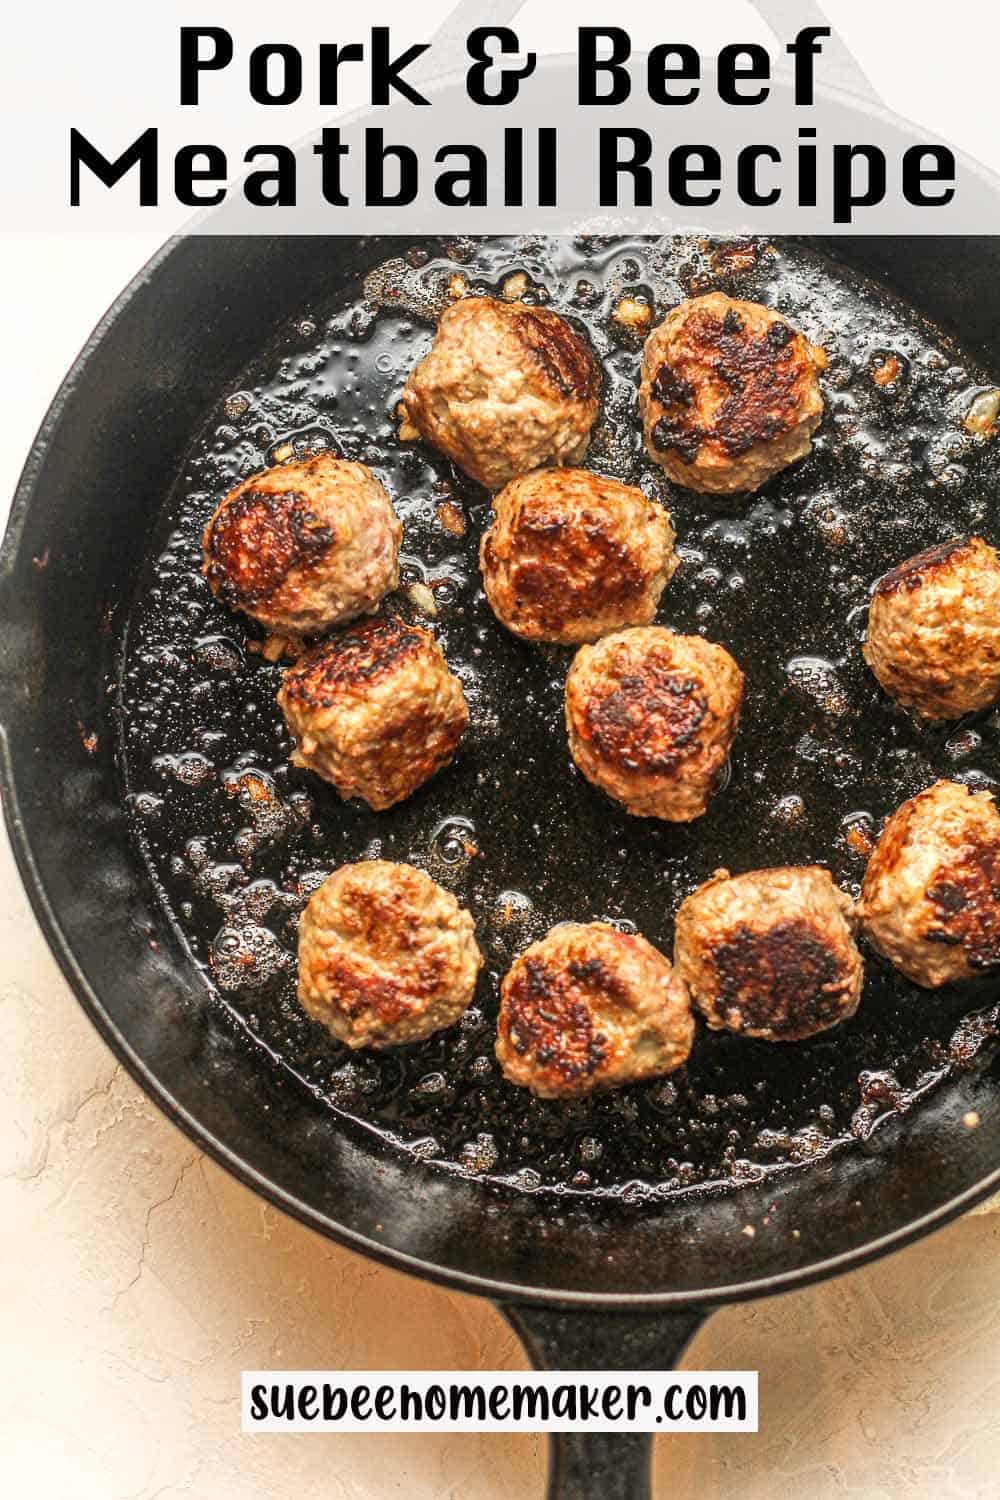 A cast iron skillet of browned pork and beef meatballs.